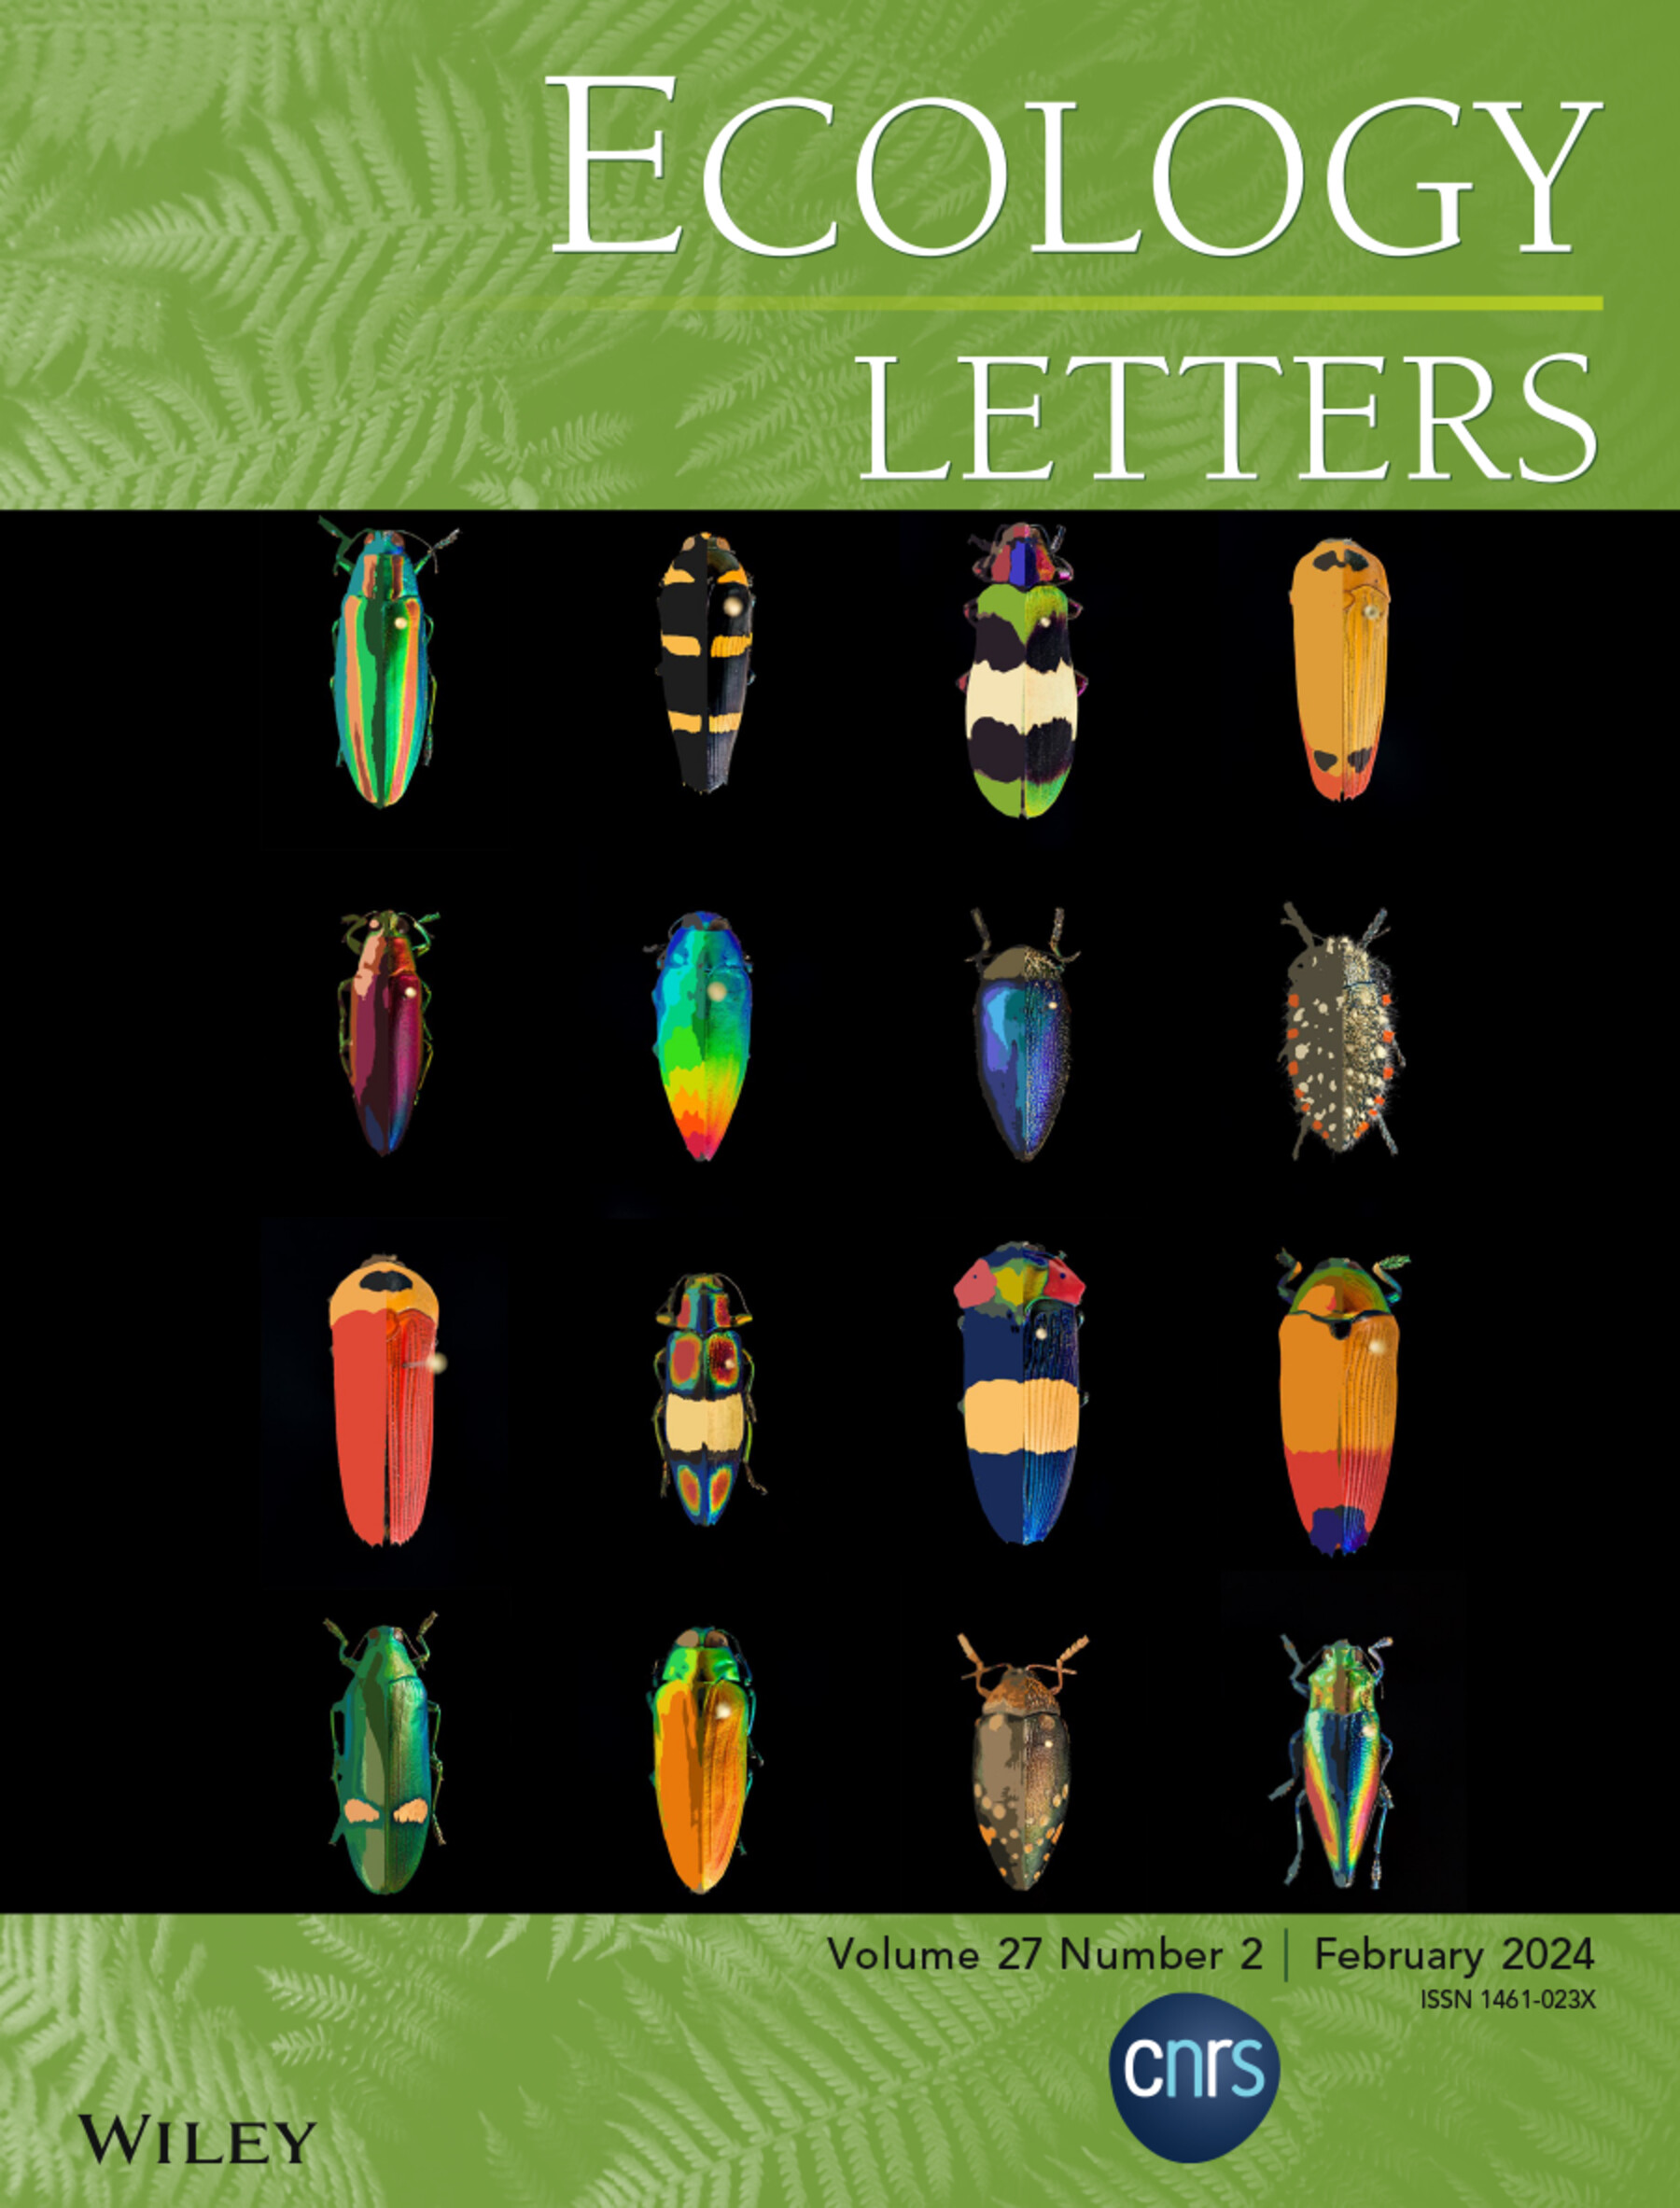 Cover image of Ecology Letters (February 2024).